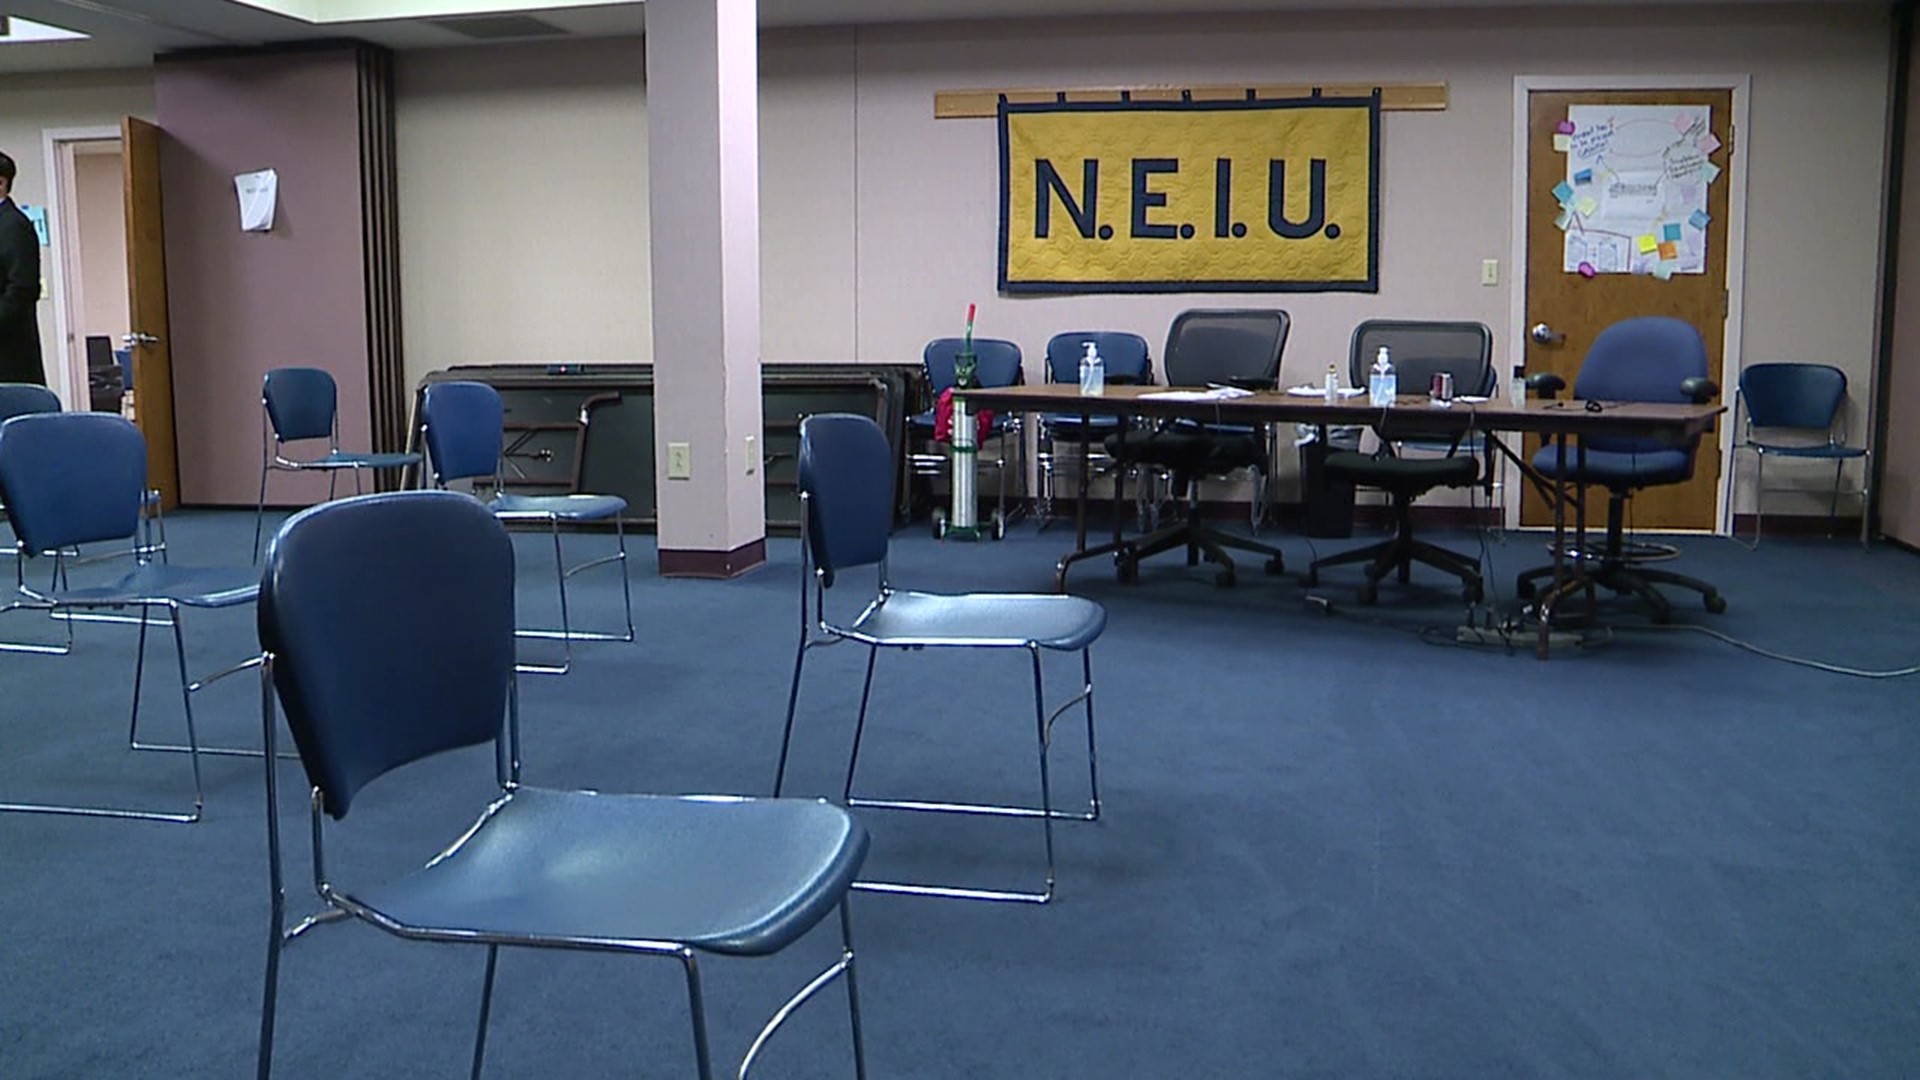 A room at the NEIU 19 in Archbald was filled Monday with teachers, bus drivers, school maintenance staff anyone who works in a school setting and wants the vaccine.